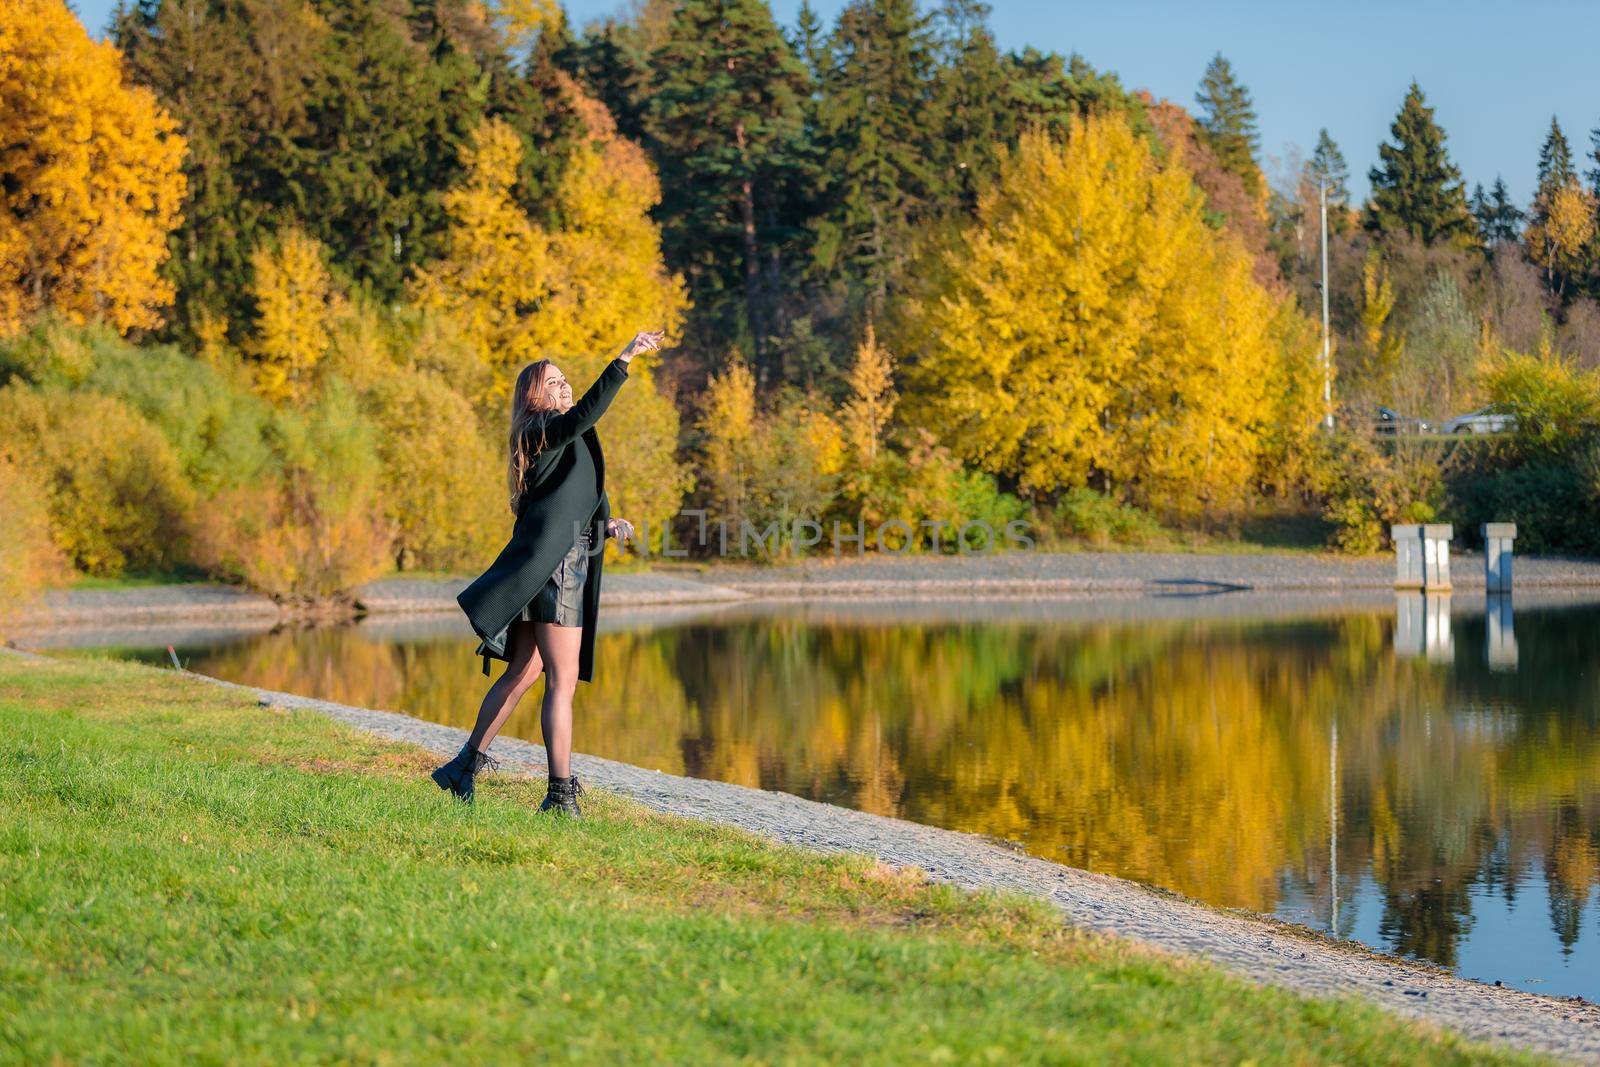 A woman with long hair walks in an autumn park by a pond and throws stones into the water. by Yurich32